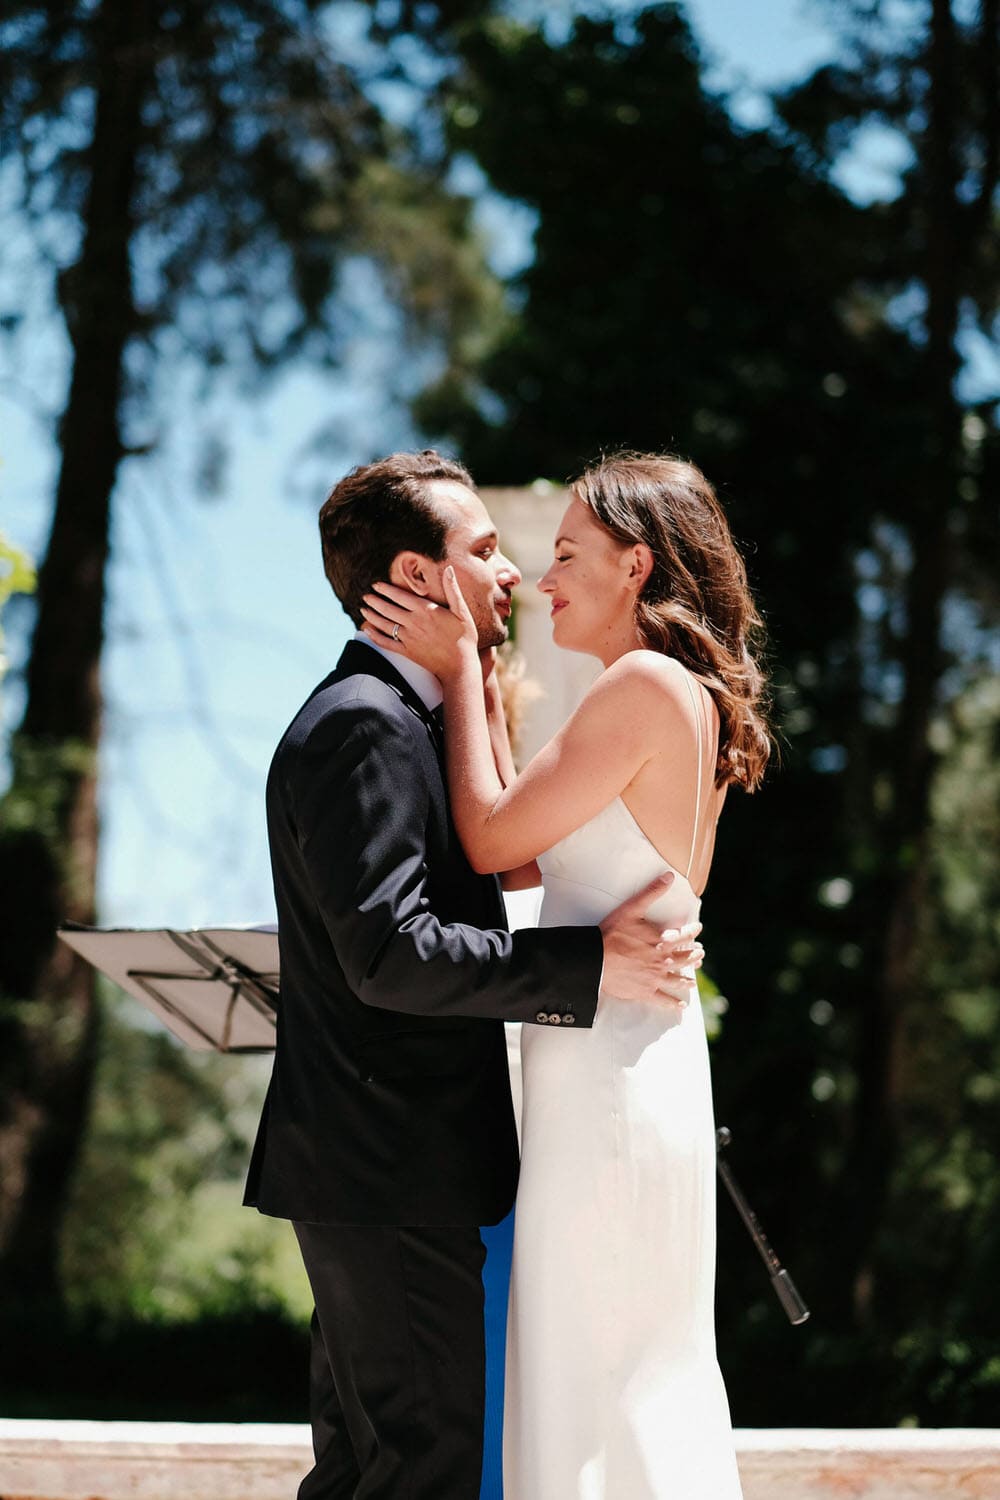 The couple shares their first kiss during the ceremony, with friends looking on and smiling